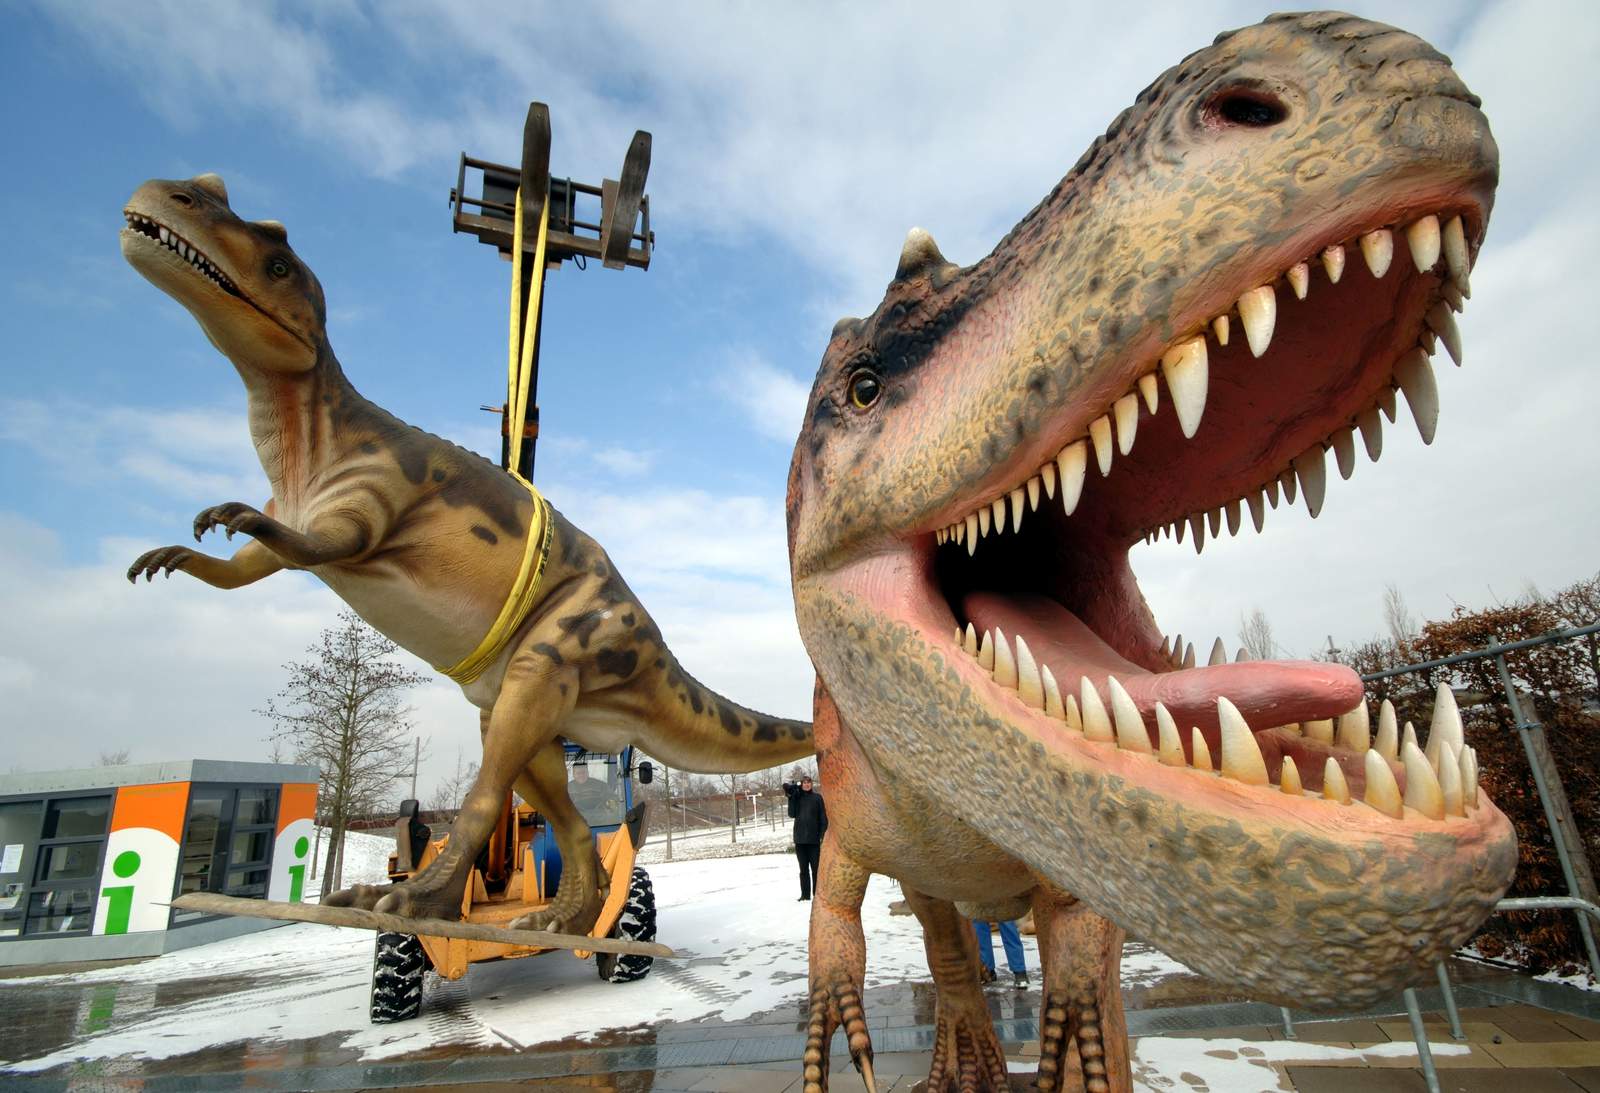 Study: 2.5 billion T. rex roamed Earth, but not all at once